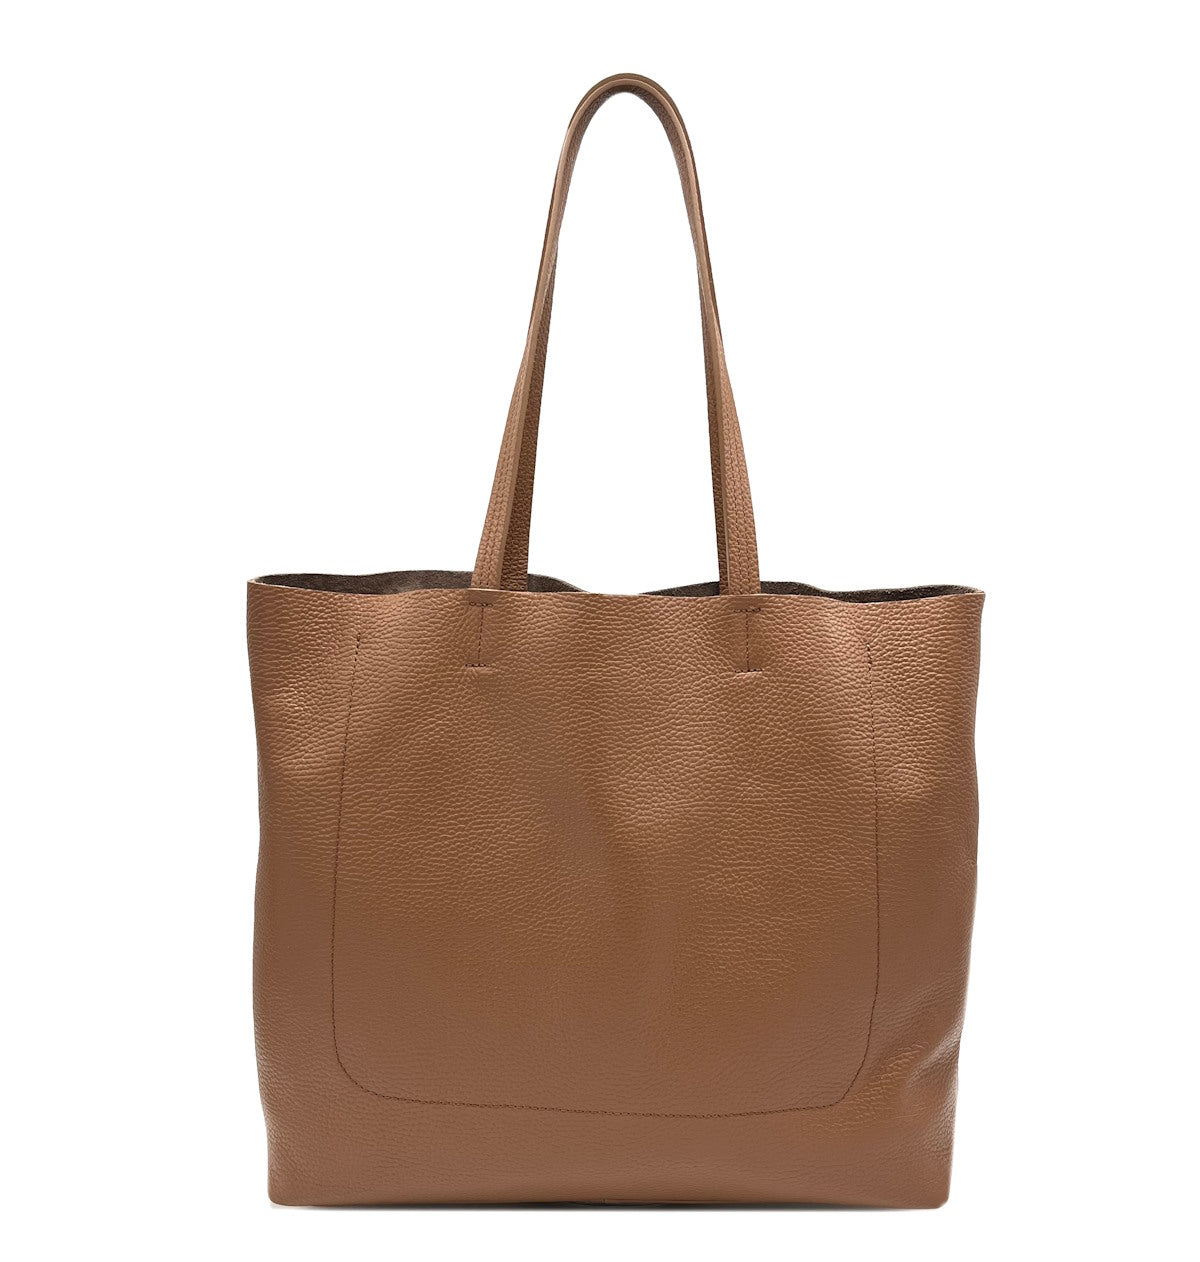 Genuine leather shopping bag, for women, Made in Italy, art. 112443